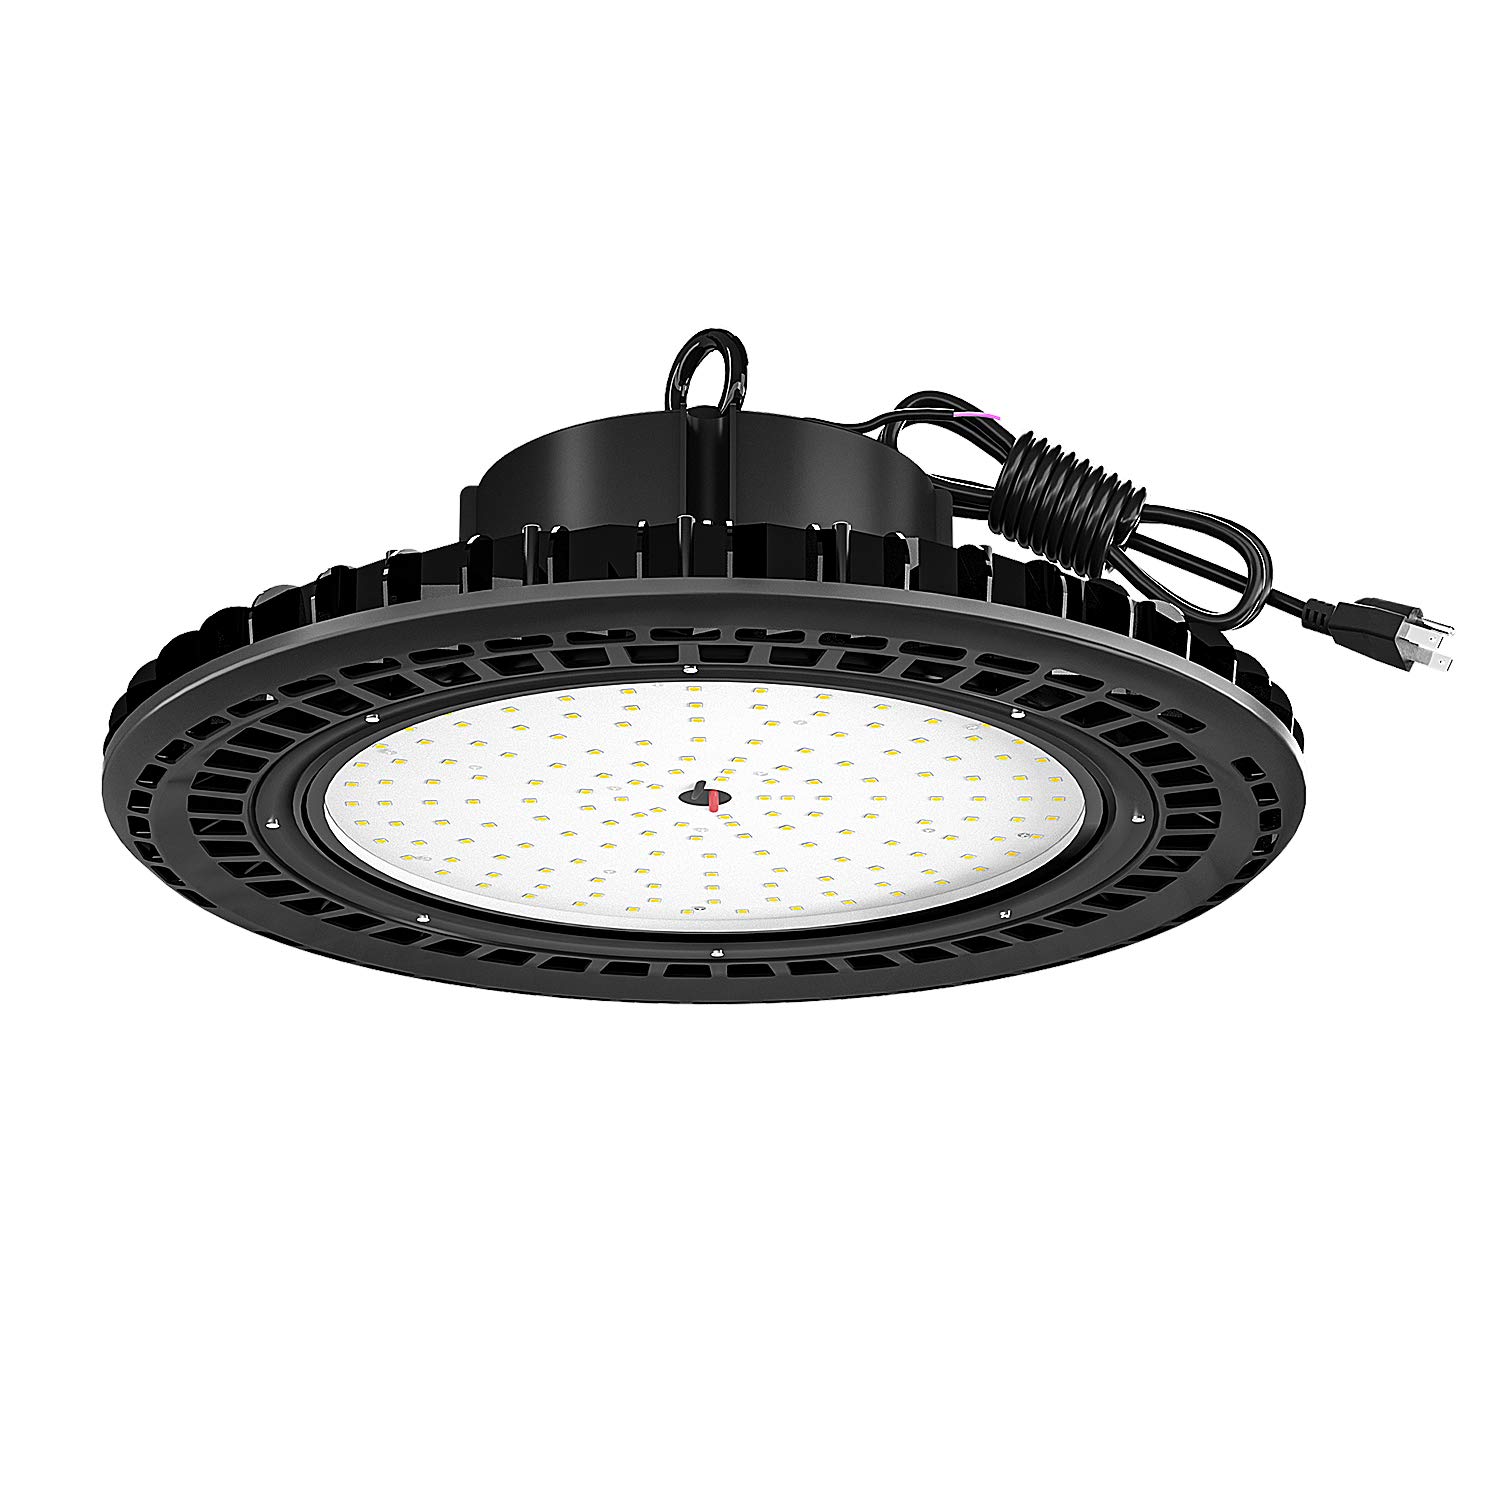 AntLux UFO LED High Bay Light 100W (400W HID/HPS Replacement), 12000 Lumens, Dimmable, US Plug, 5000K Daylight White, IP65 Waterproof Commercial Grade Area Warehouse Workshop Hanging Lighting Fixtures